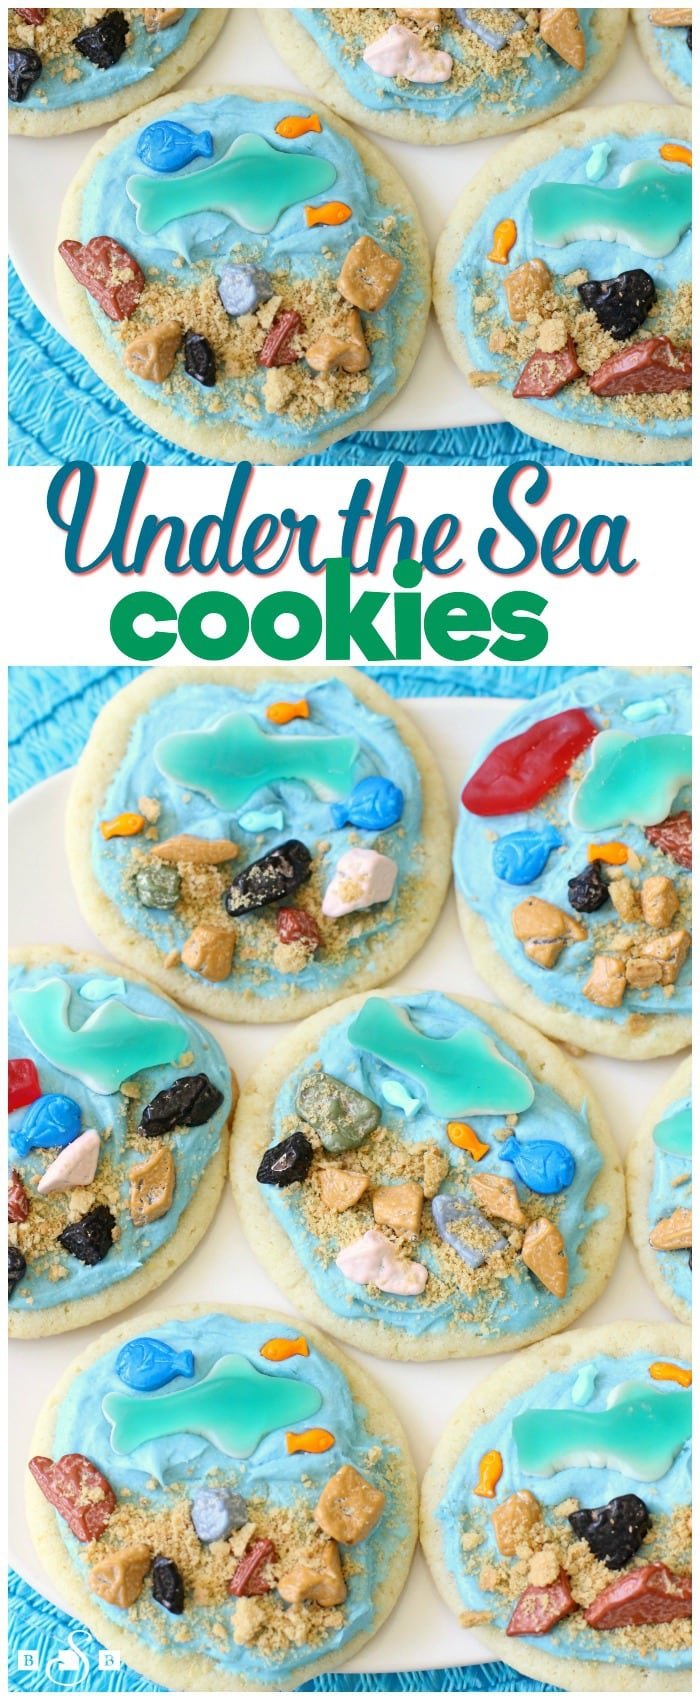 My kids have always been fascinated with ocean creatures, so when we found out the movie Finding Dory hits theaters tomorrow, then Discovery Channel's Shark Week is 10 days later, well, that calls for some celebrating! We made these cute "Under the Sea" Cookies that are just as fun to make as they are to eat.